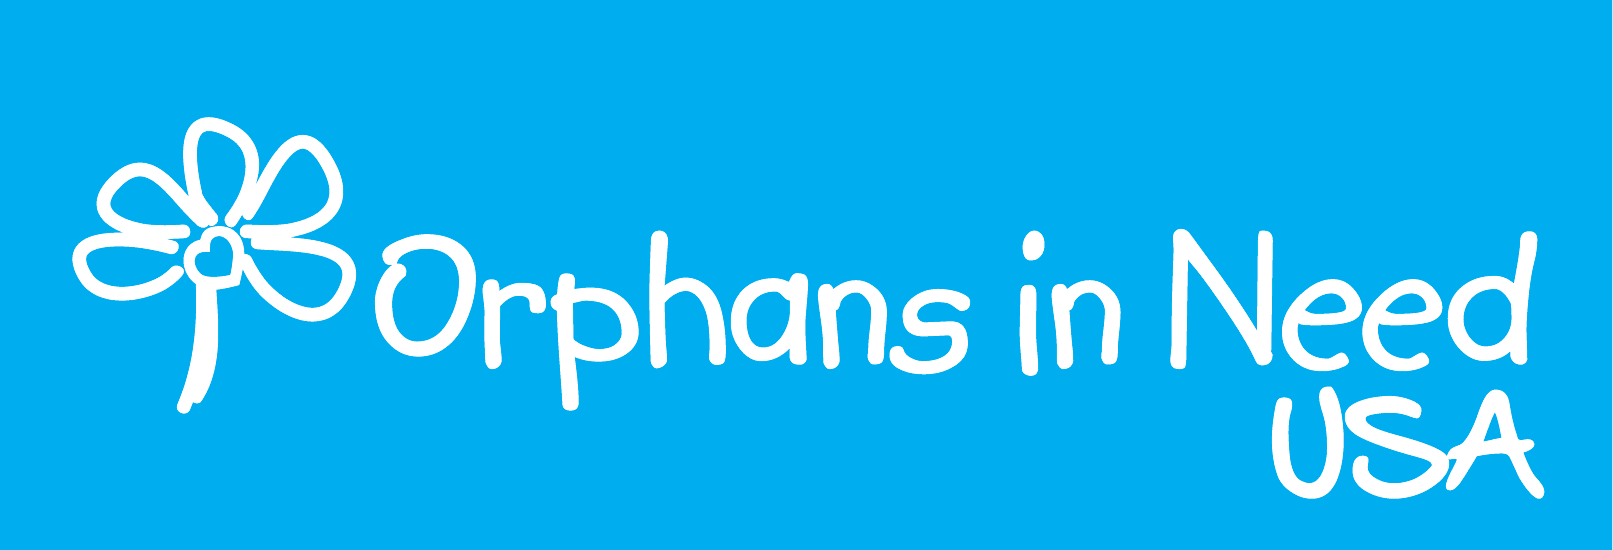 Orphans In Need USA